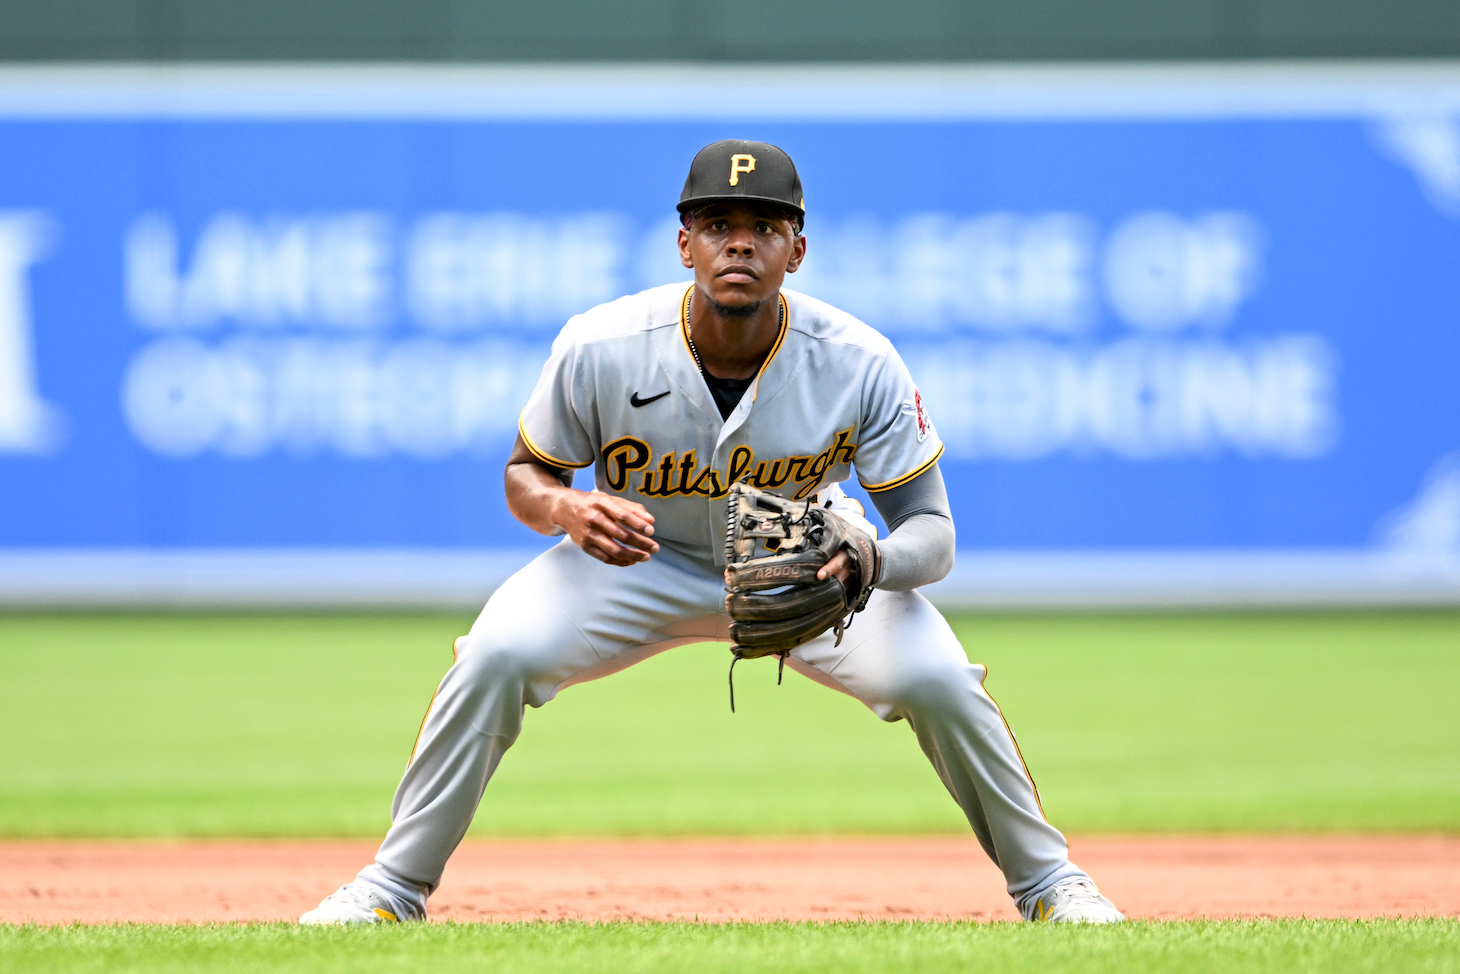 BALTIMORE, MD - AUGUST 07, 2022: Ke'Bryan Hayes #13 of the Pittsburgh Pirates in the field during the fourth inning against the Baltimore Orioles at Oriole Park at Camden Yards on August 7, 2022 in Baltimore, Maryland. (Photo by Chris Bernacchi/Diamond Images via Getty Images)